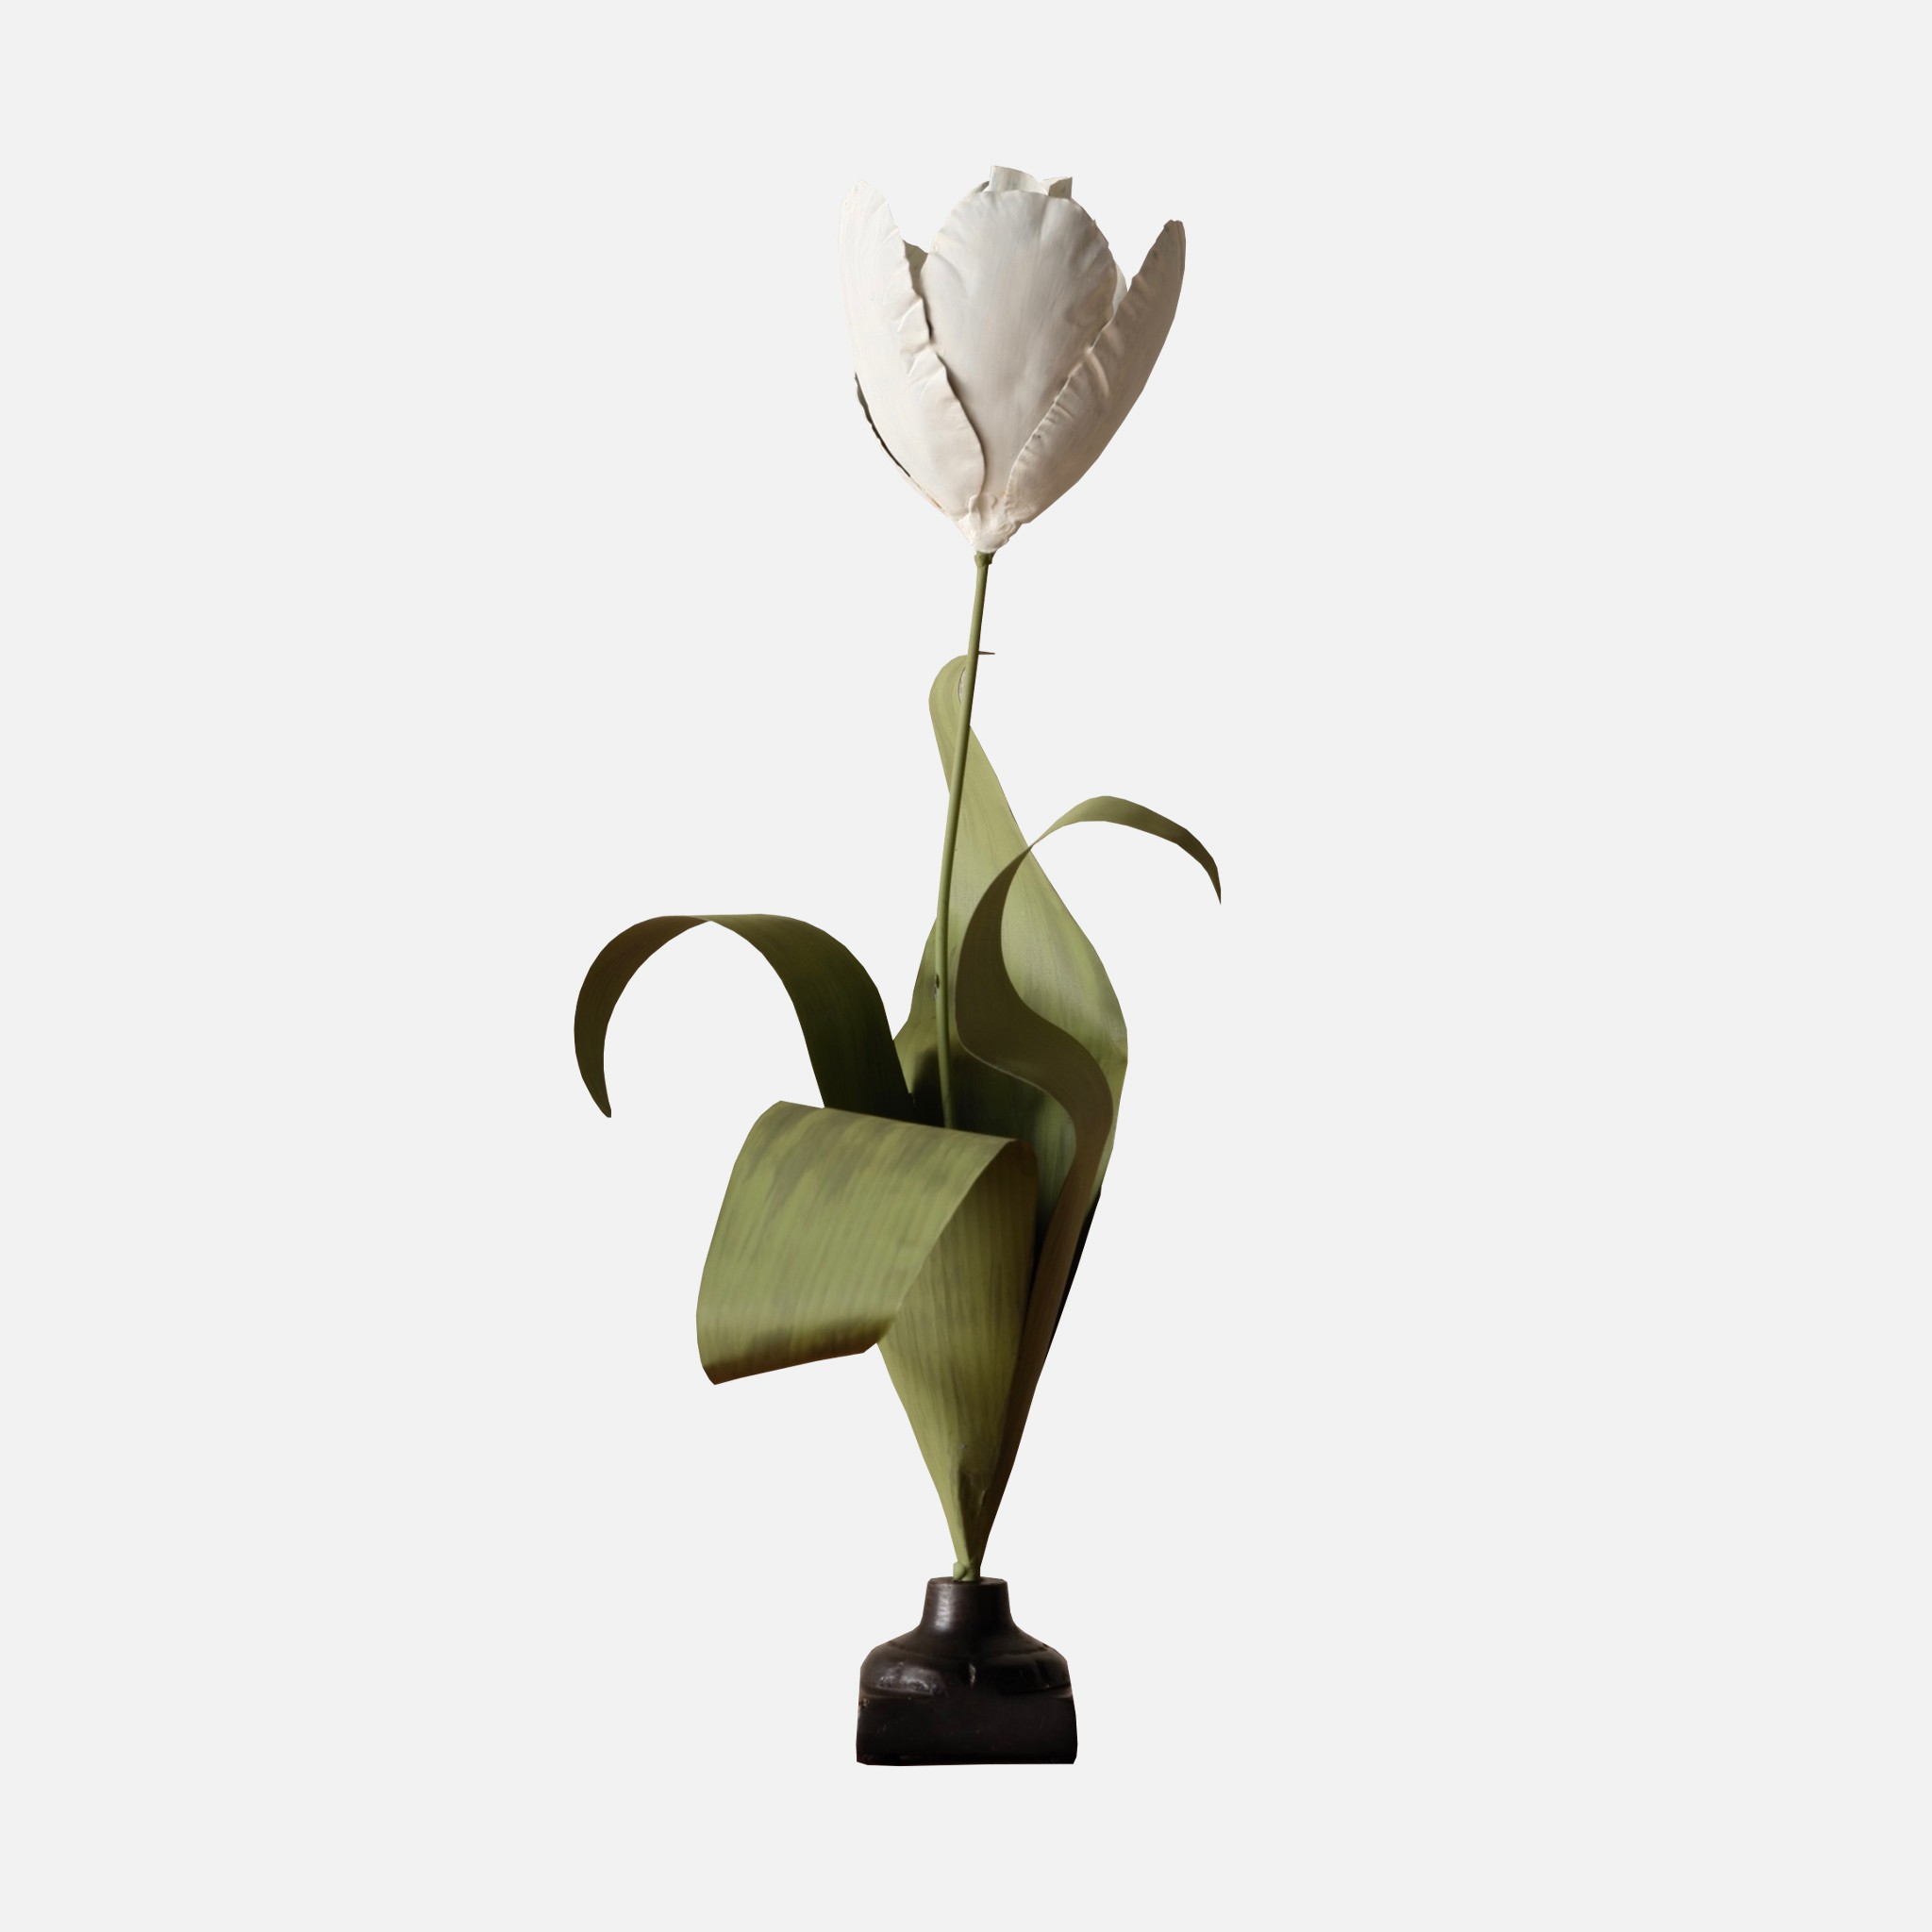 The image of an Casa Gusto Tole Tulip product